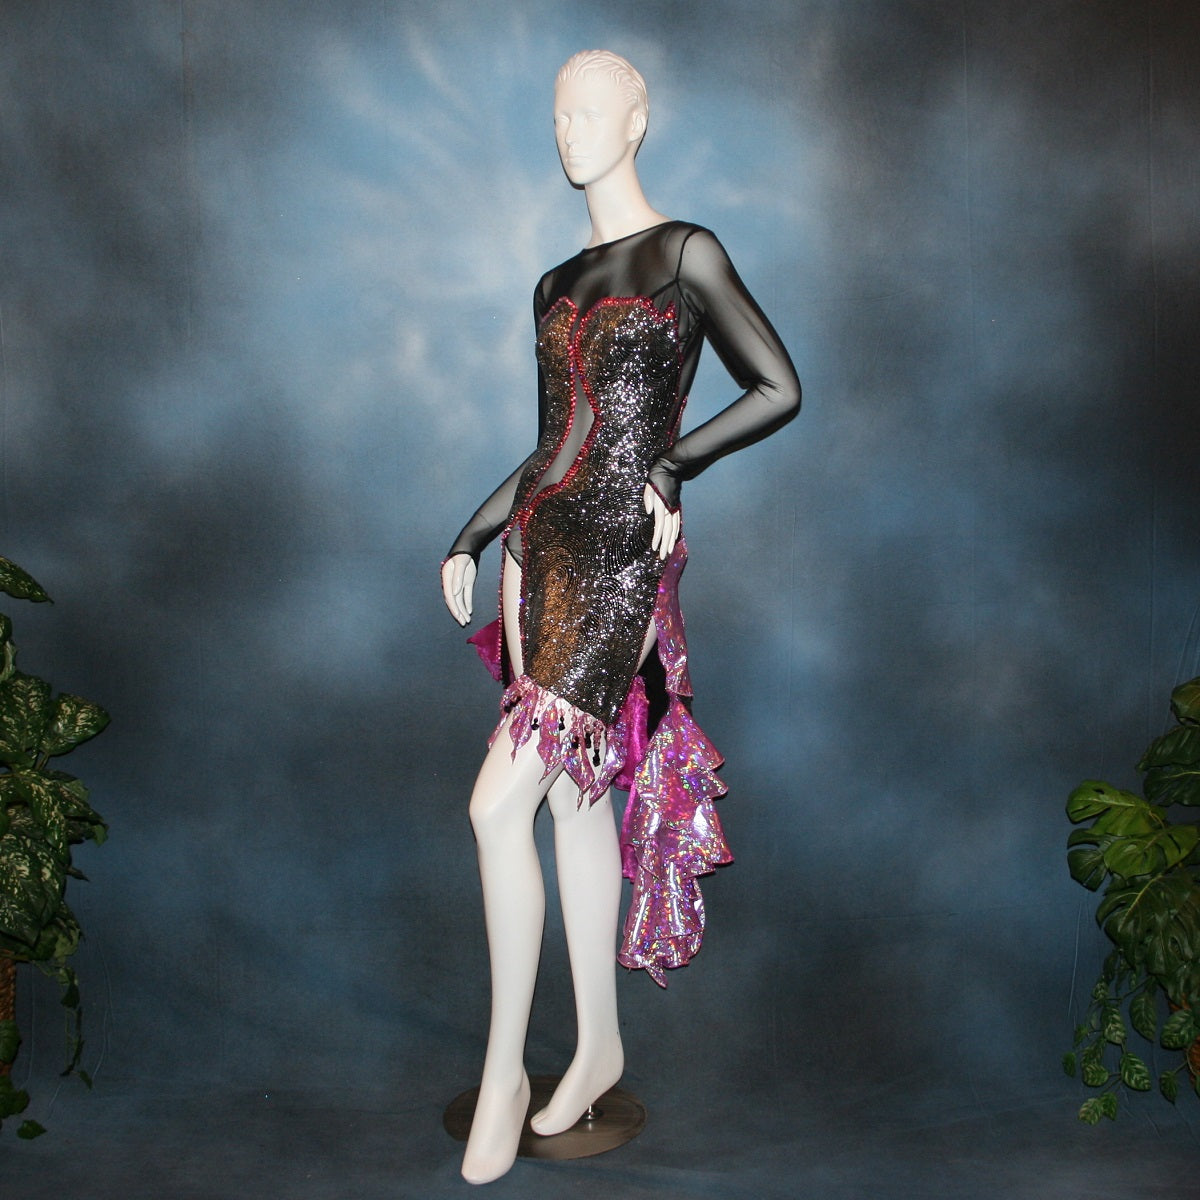 Crystal's Creations left front view of Black & silver Latin/rhythm dress with pink accents created of gorgeous silver swirls on black glitter slinky on a sheer stretch mesh base, embellished with pink Swarovski rhinestone work & hand beading